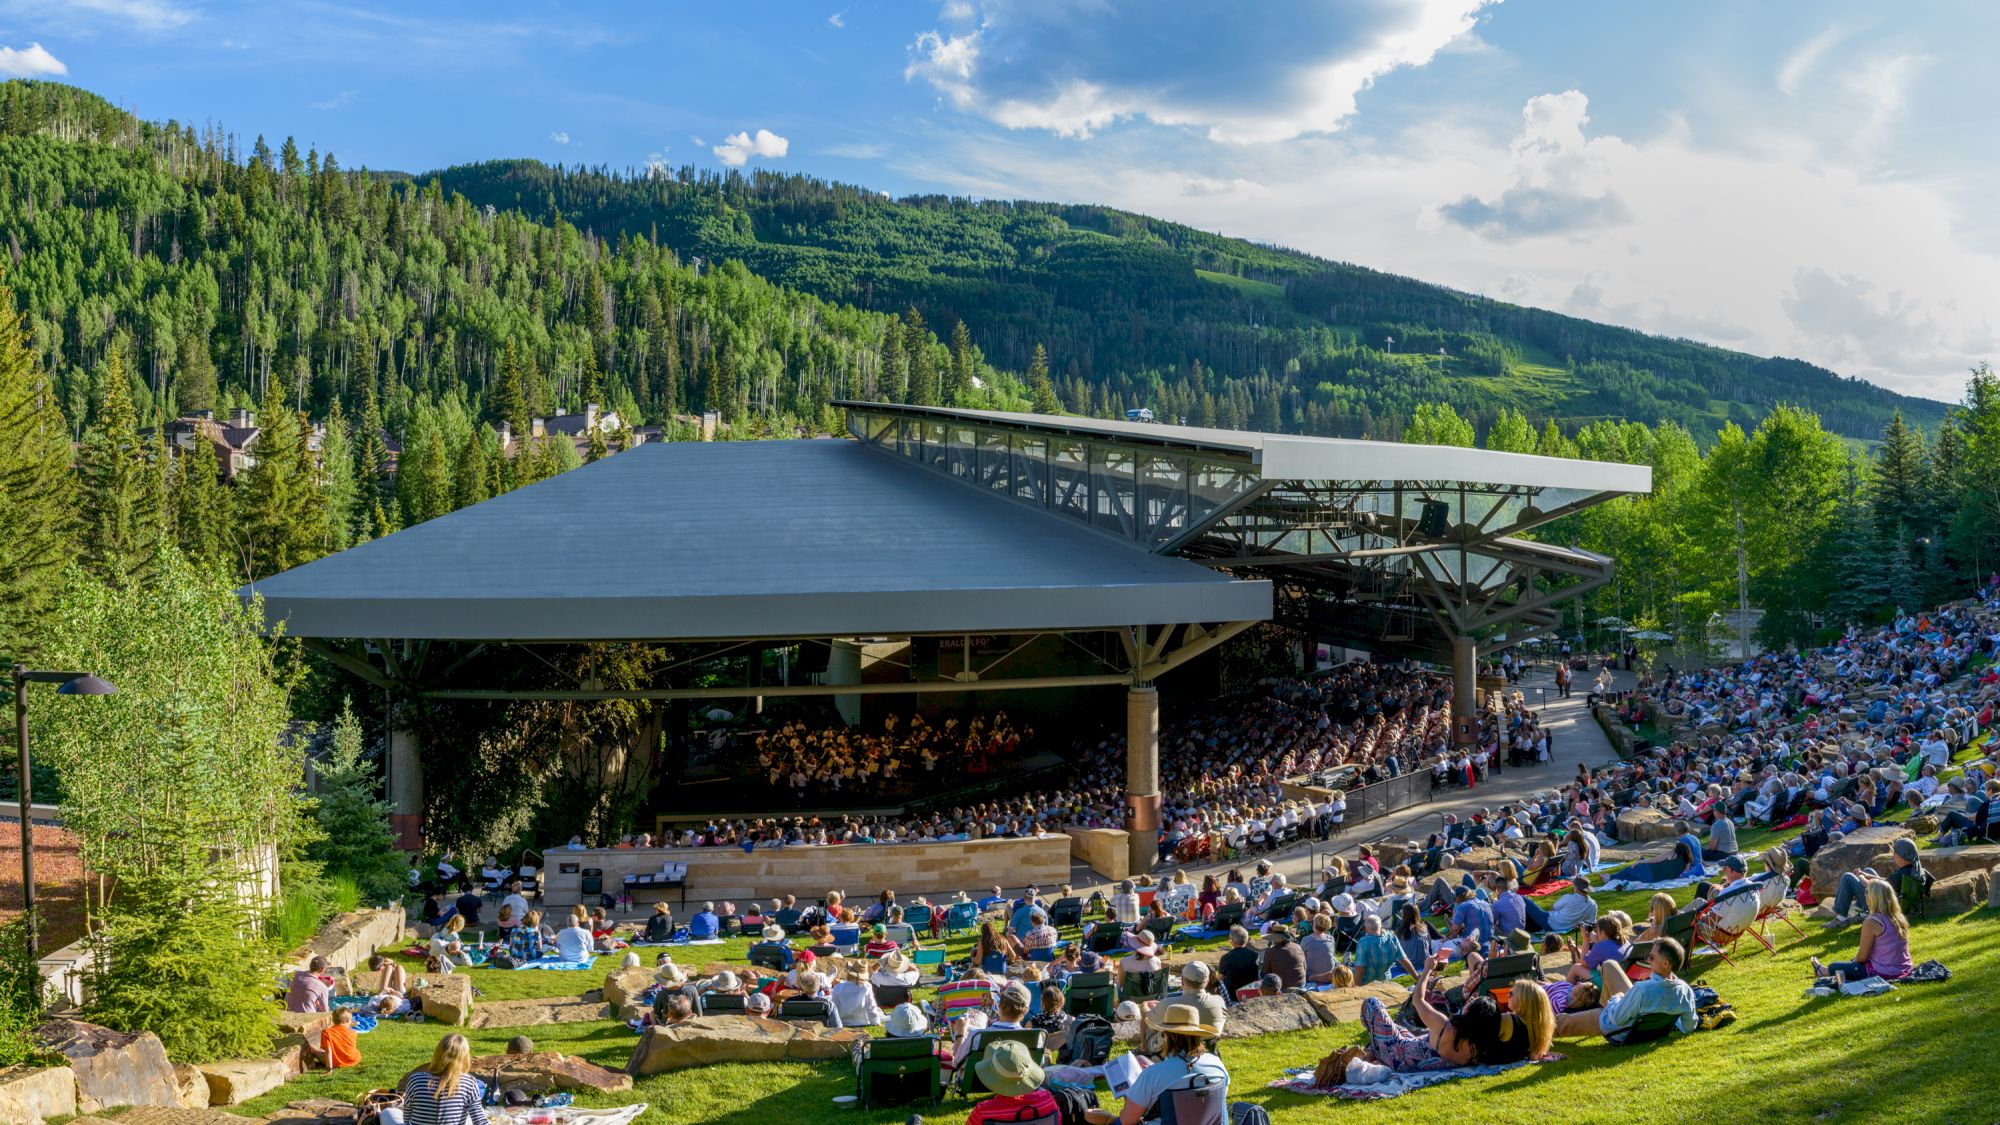 An outdoor concert with a large audience on a grassy slope, surrounded by trees and scenic mountains. The sky is partly cloudy.